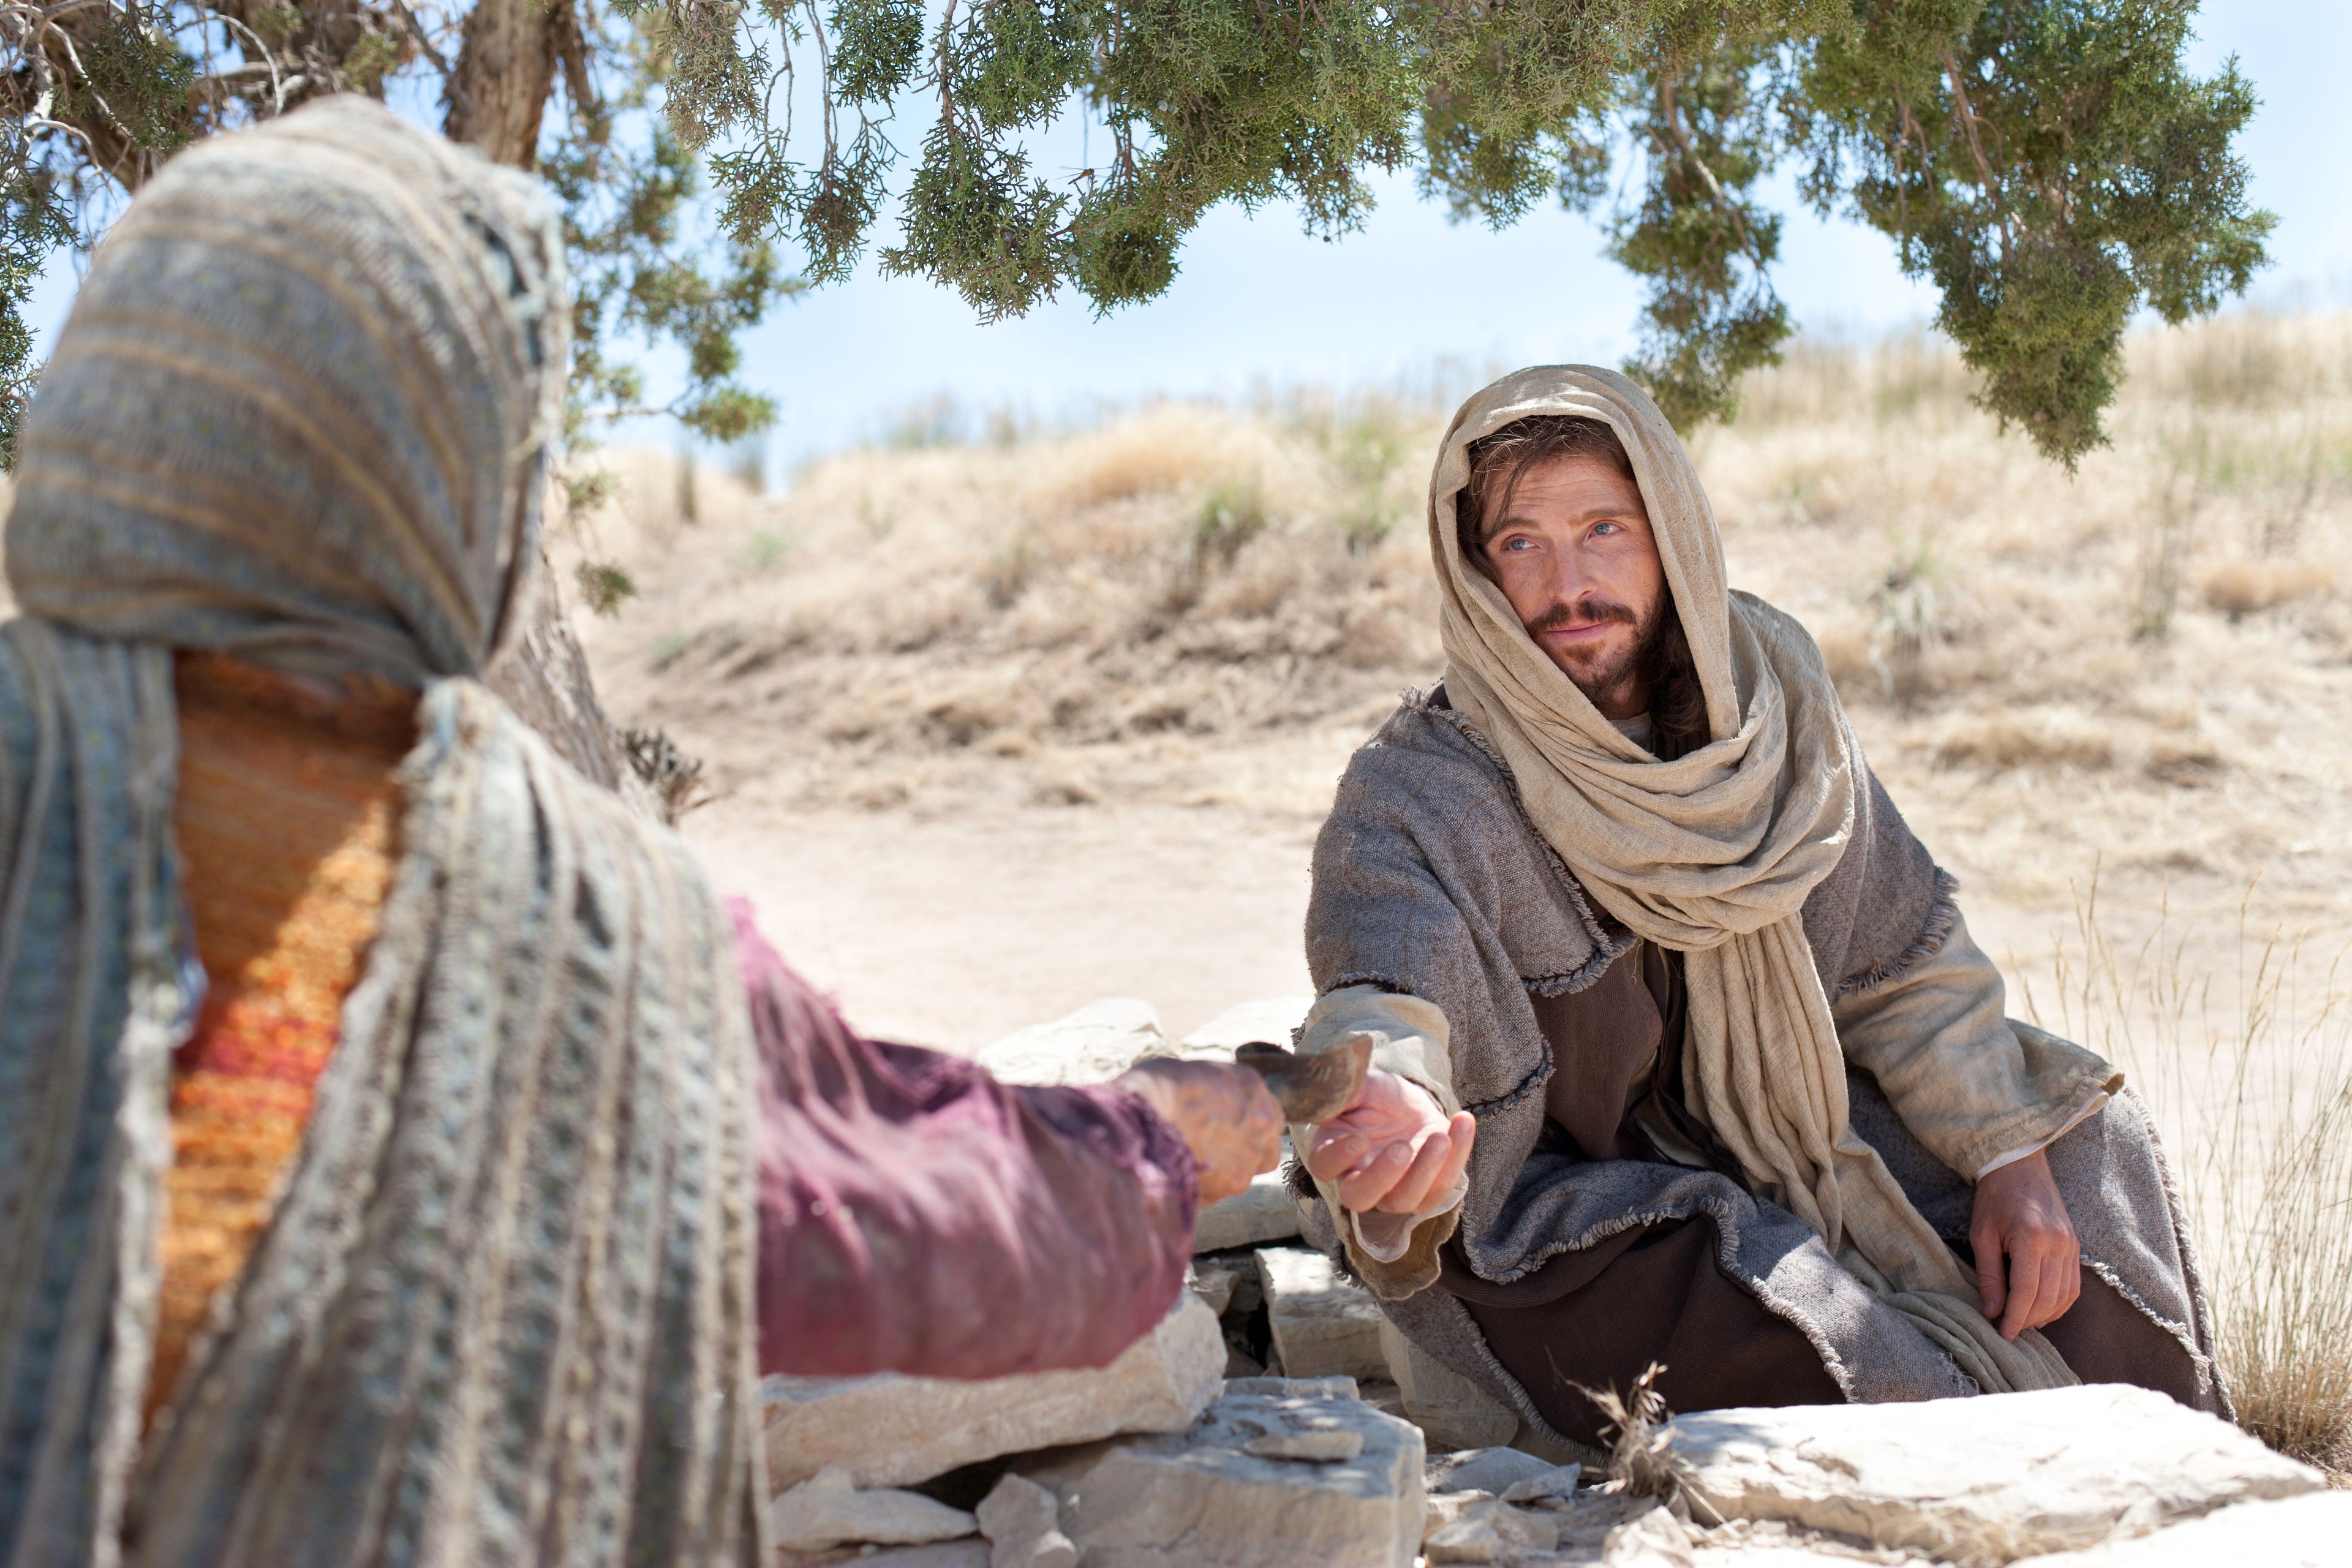 Christ reaching out to accept the well water offered to Him by the Samaritan woman.